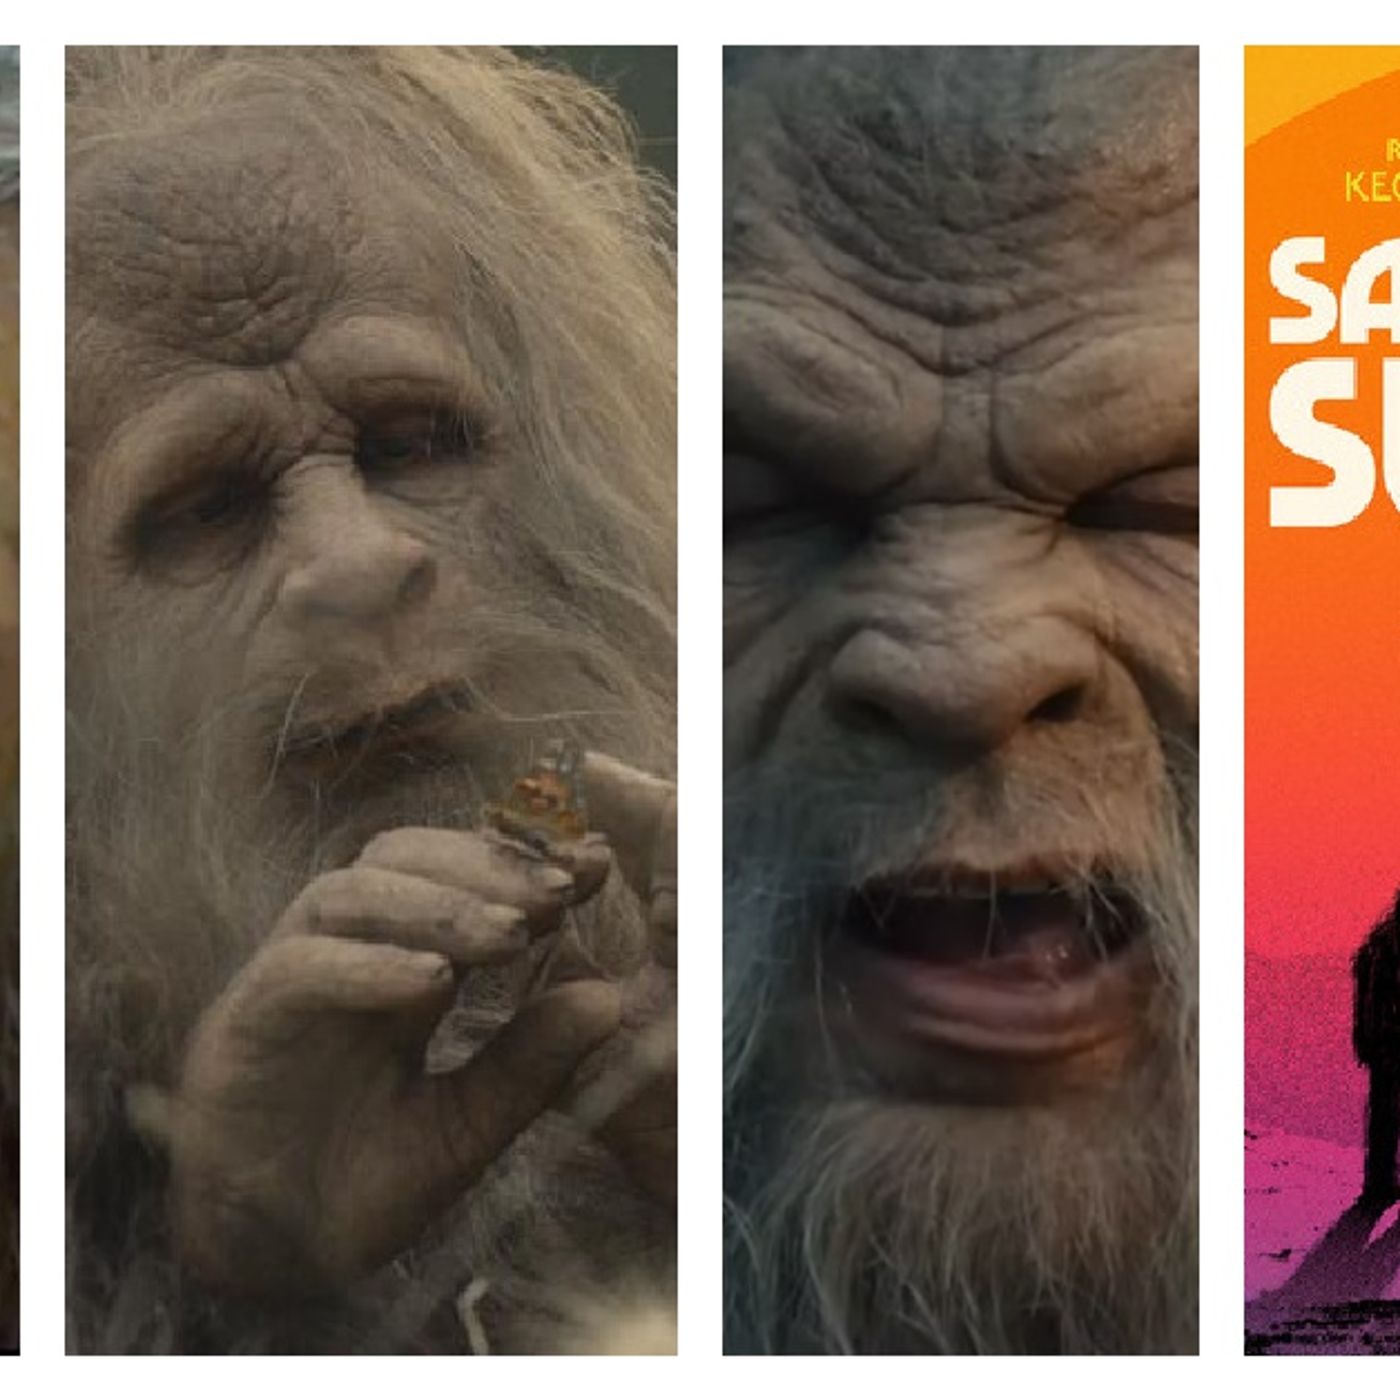 SASQUATCH SUNSET Review: Jesse Eisenberg And Riley Keough Lead Strangely Heartwarming Bigfoot Comedy